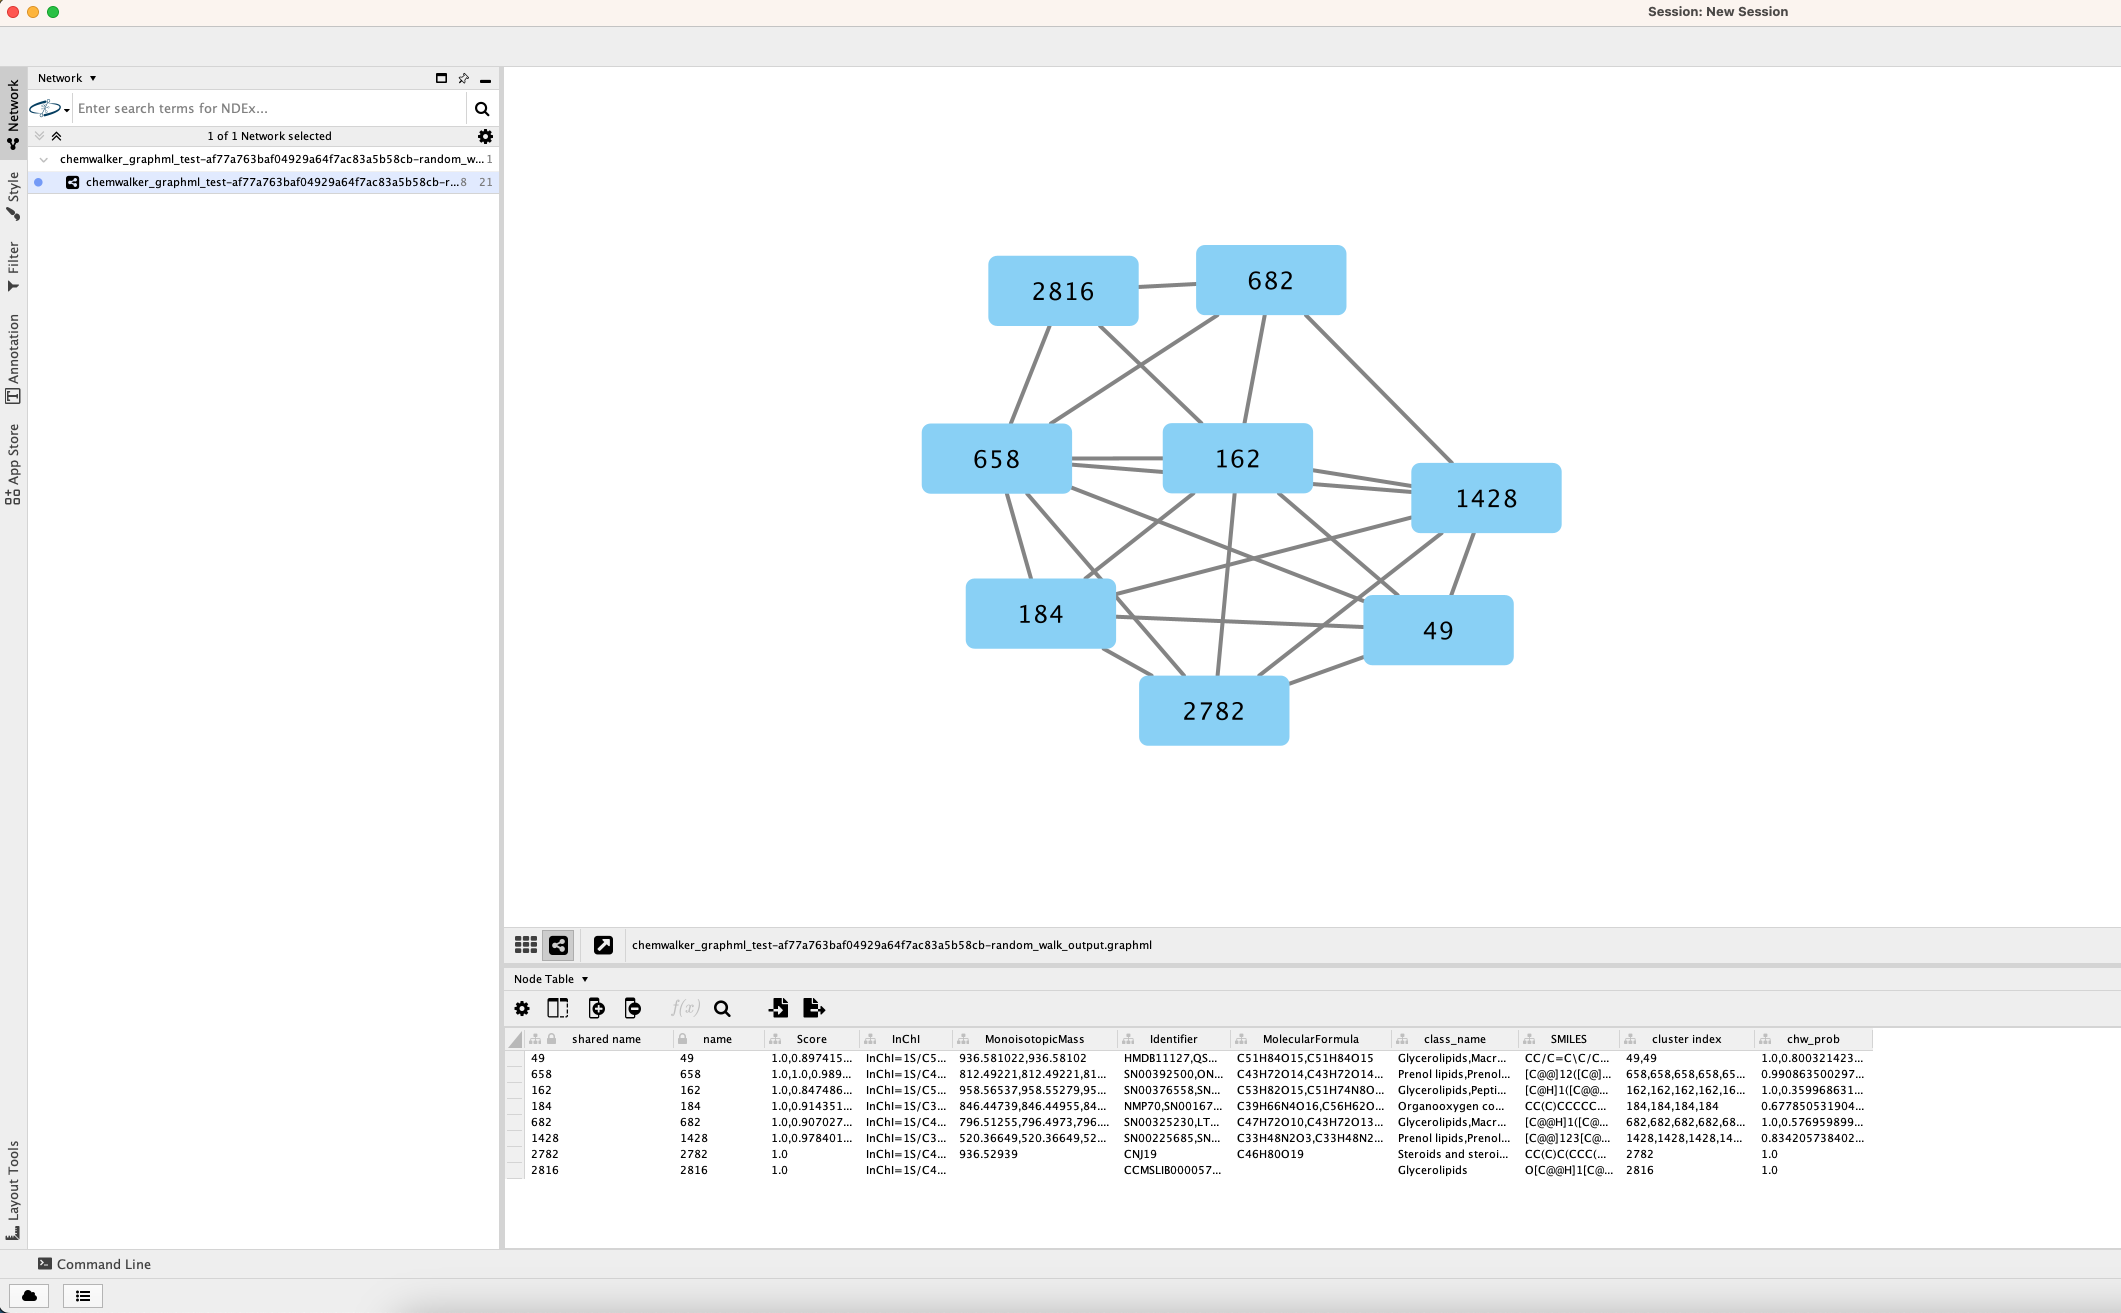 chemwalker graphml network results example